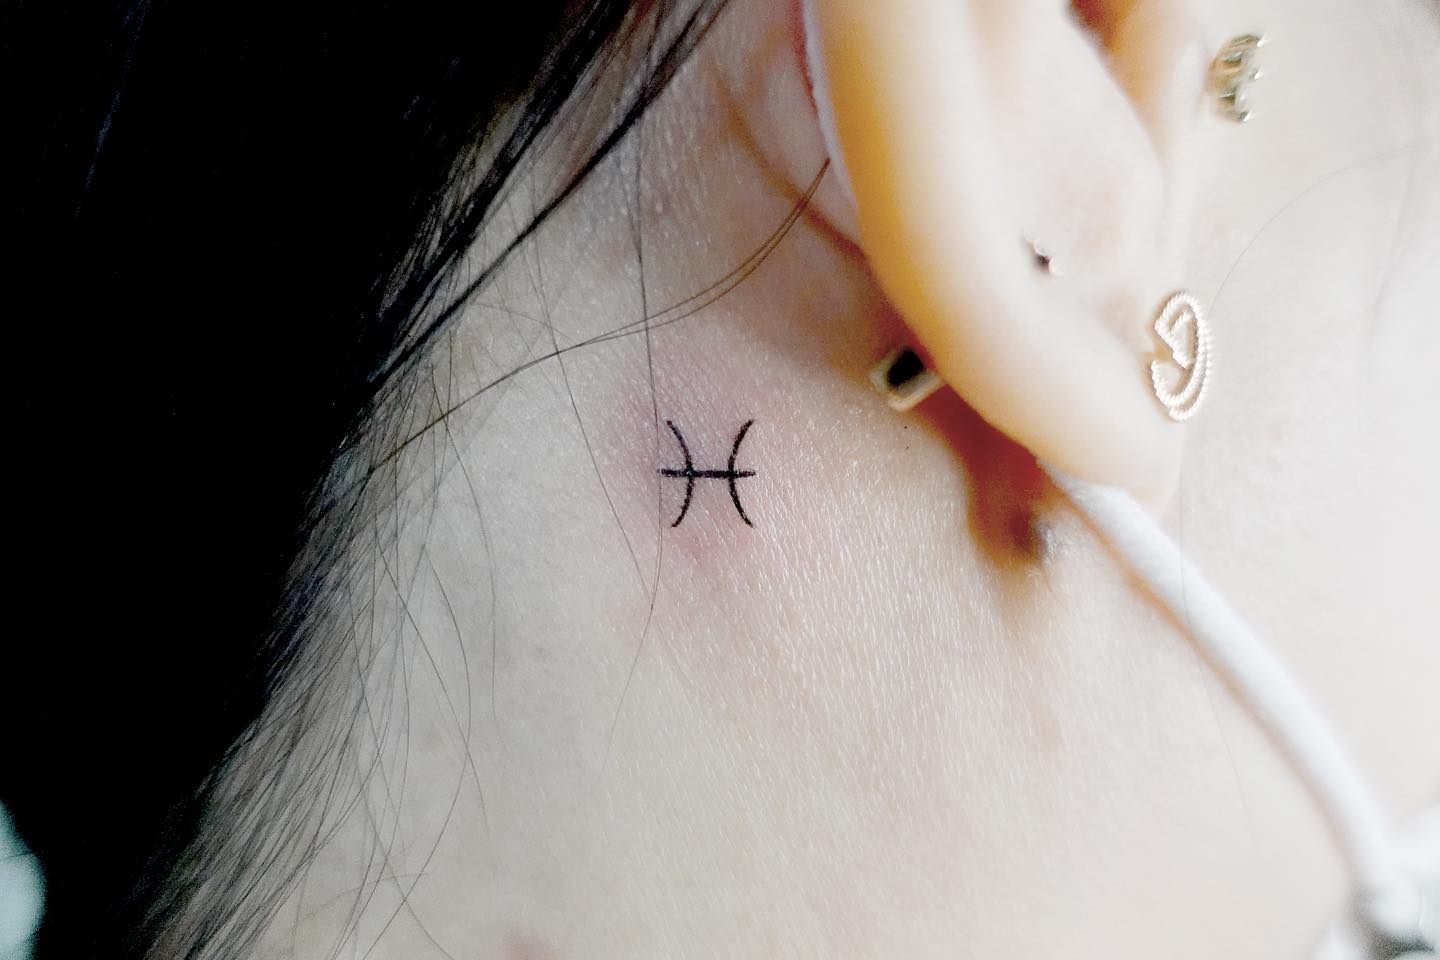 Why not try these amazing Pisces stars constellation tattoos